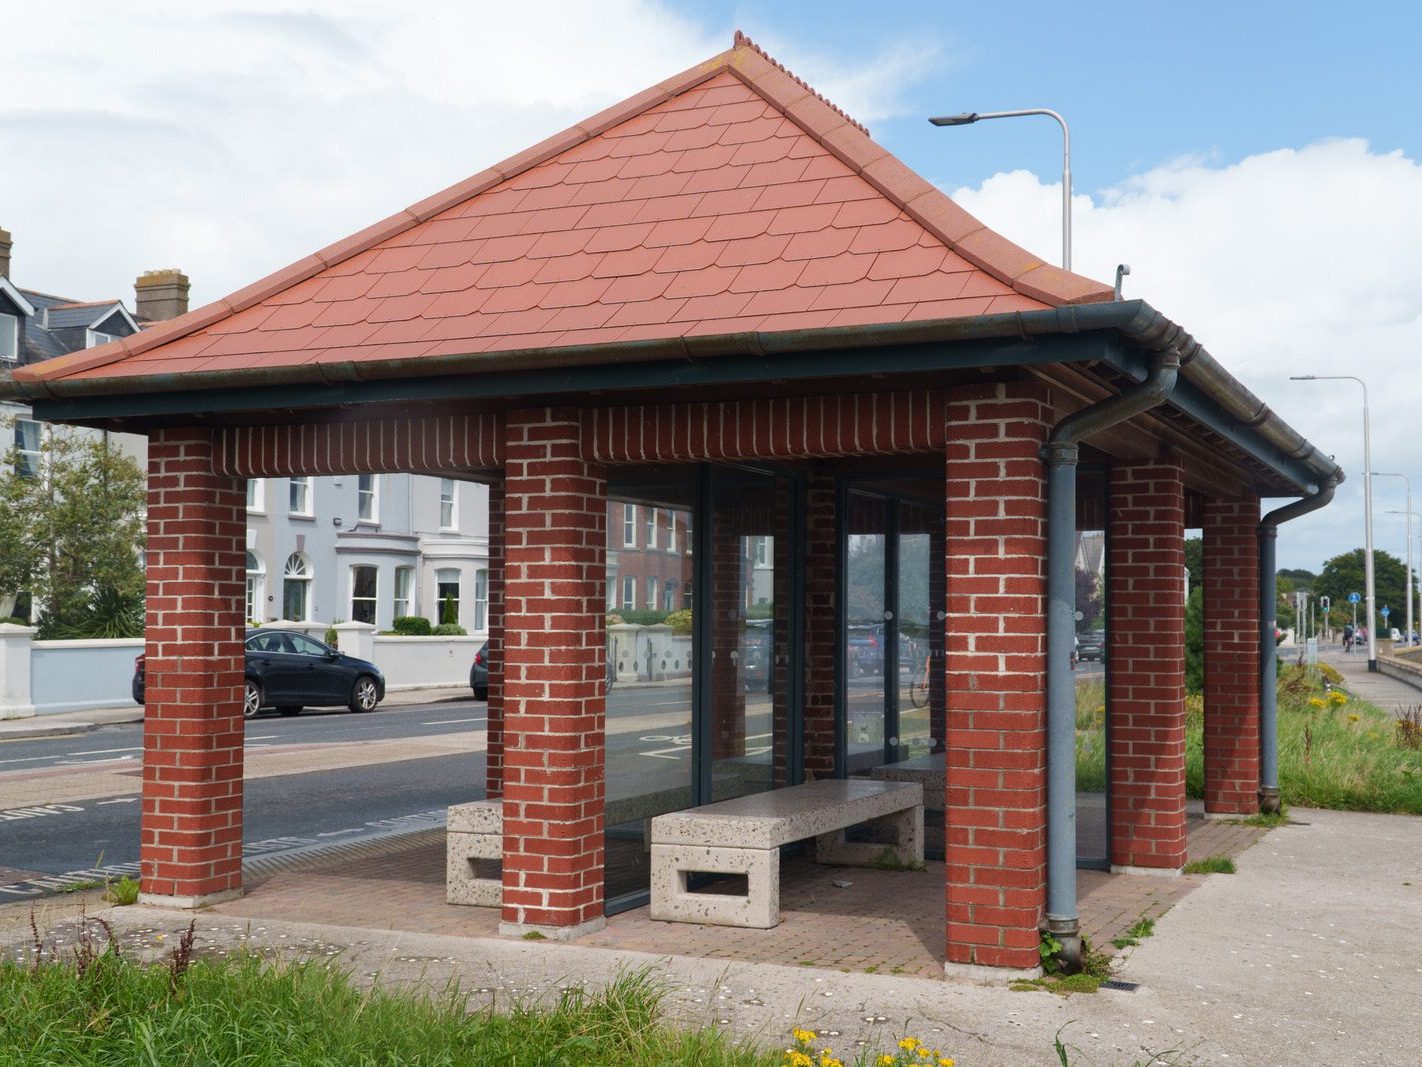 BUS SHELTER 1725 AT DOYLE'S LANE [CLONTARF ROAD AND IT IS THE MOST ATTRACTIVE THAT I HAVE SEEN IN DUBLIN] 005